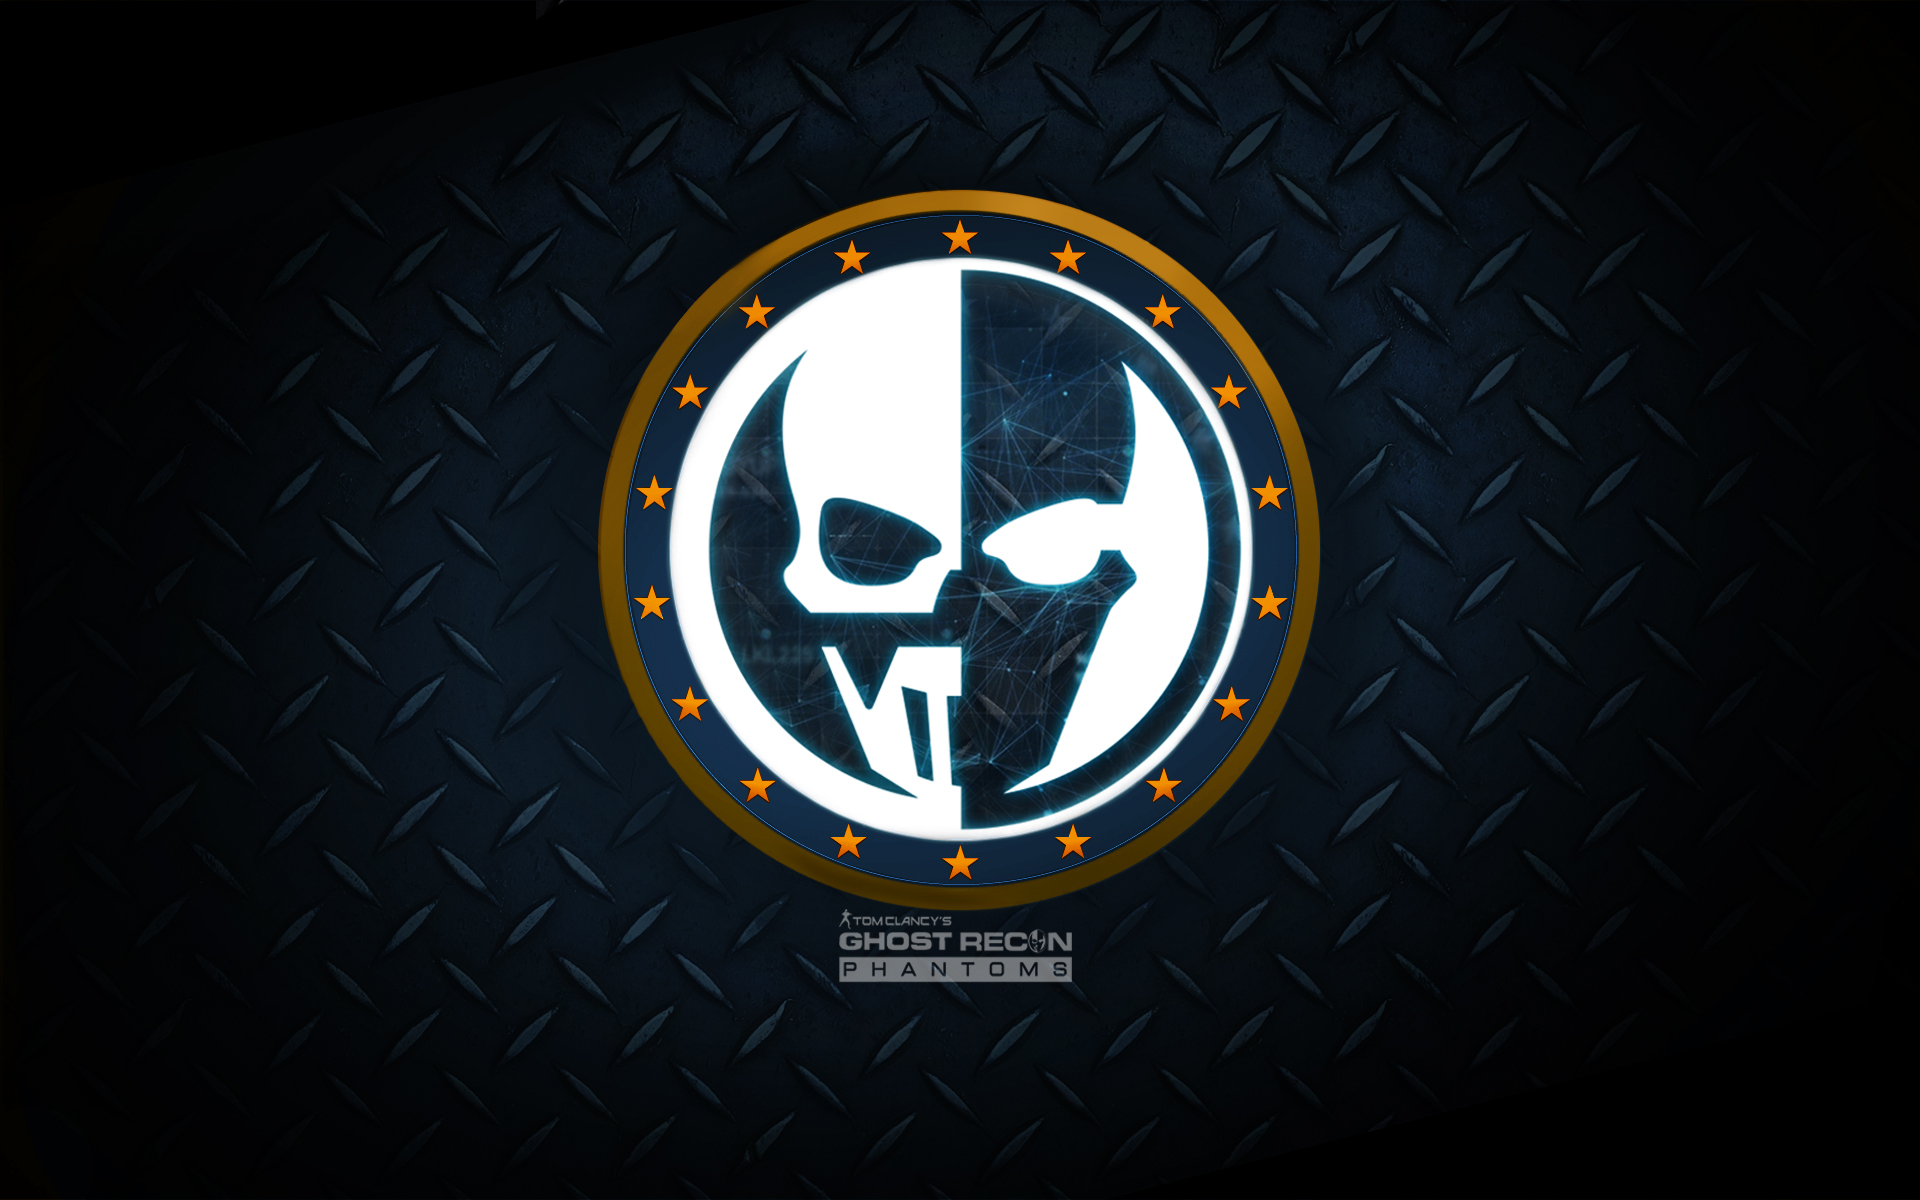 Tom Cy S Ghost Recon Phantoms Wallpaper By Spidermonkey23 On